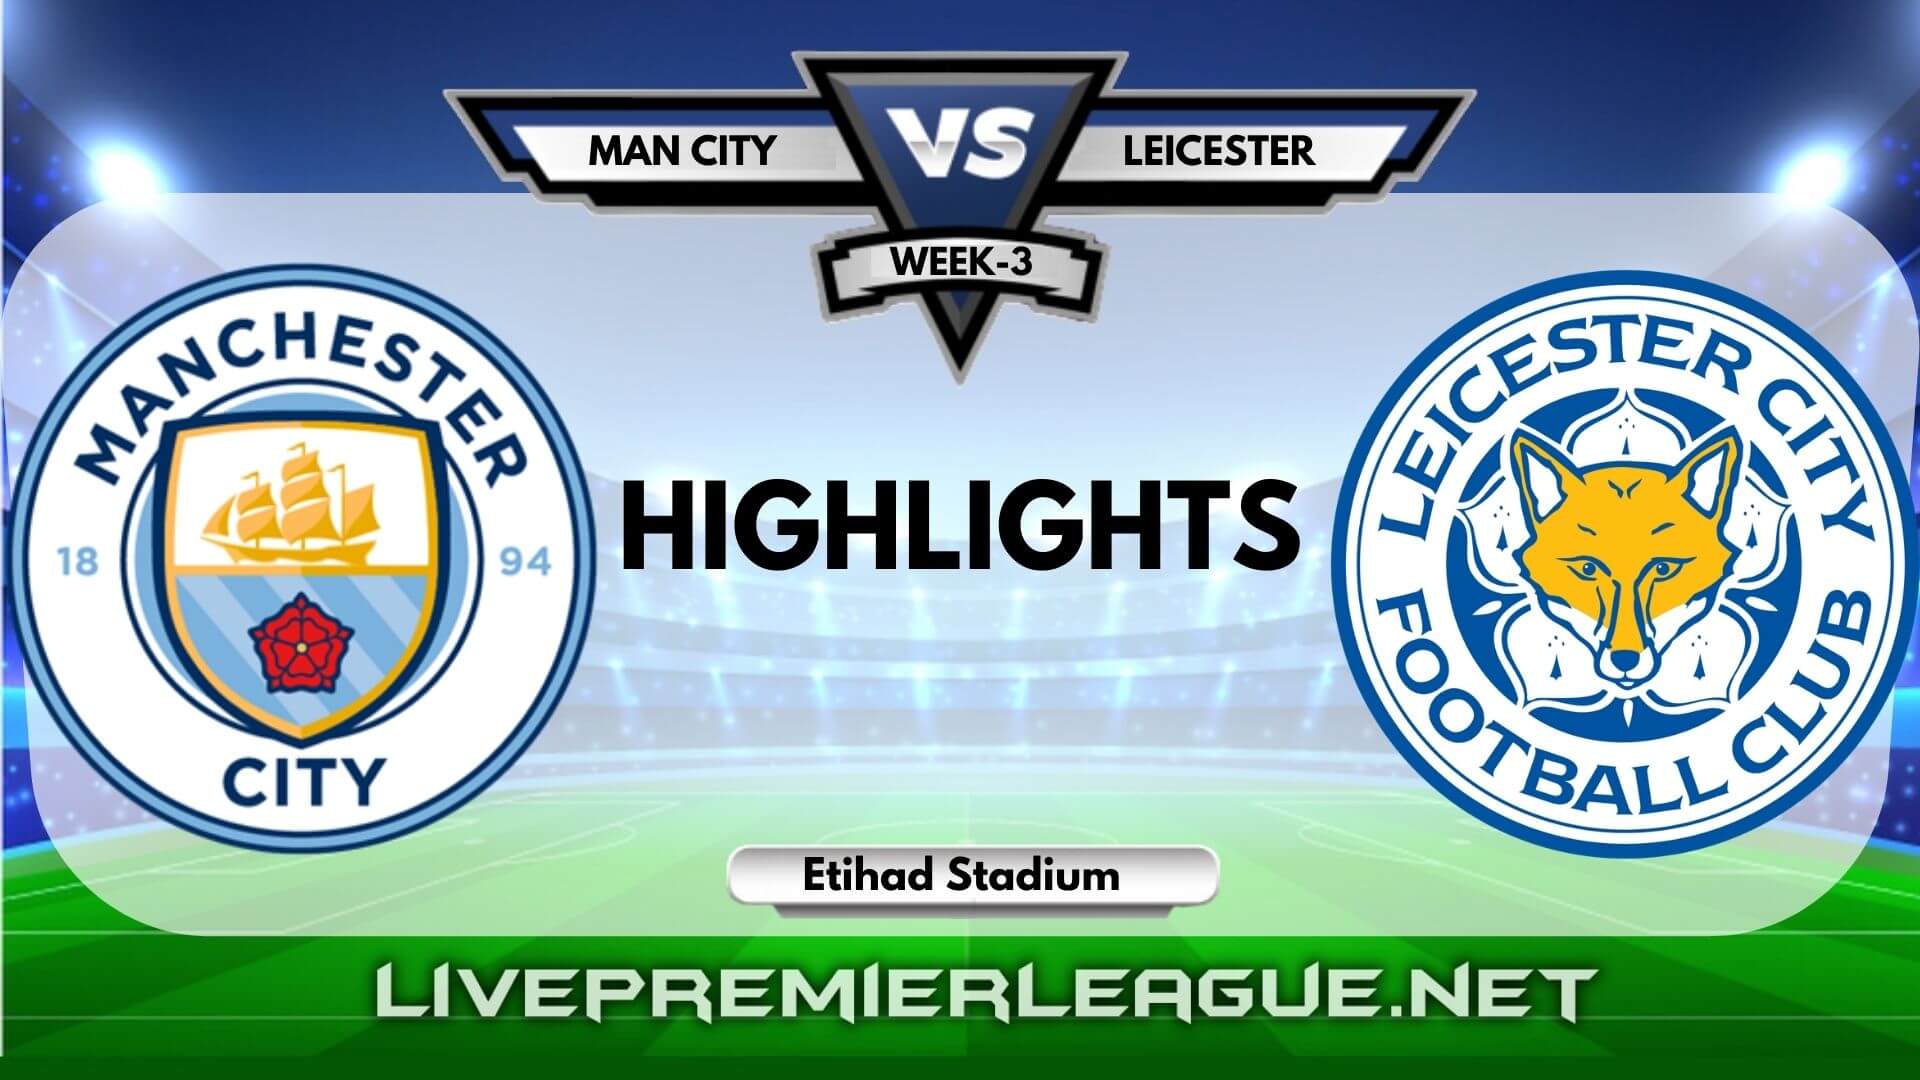 Manchester City Vs Leicester City Highlights 2020 EPL Week 3